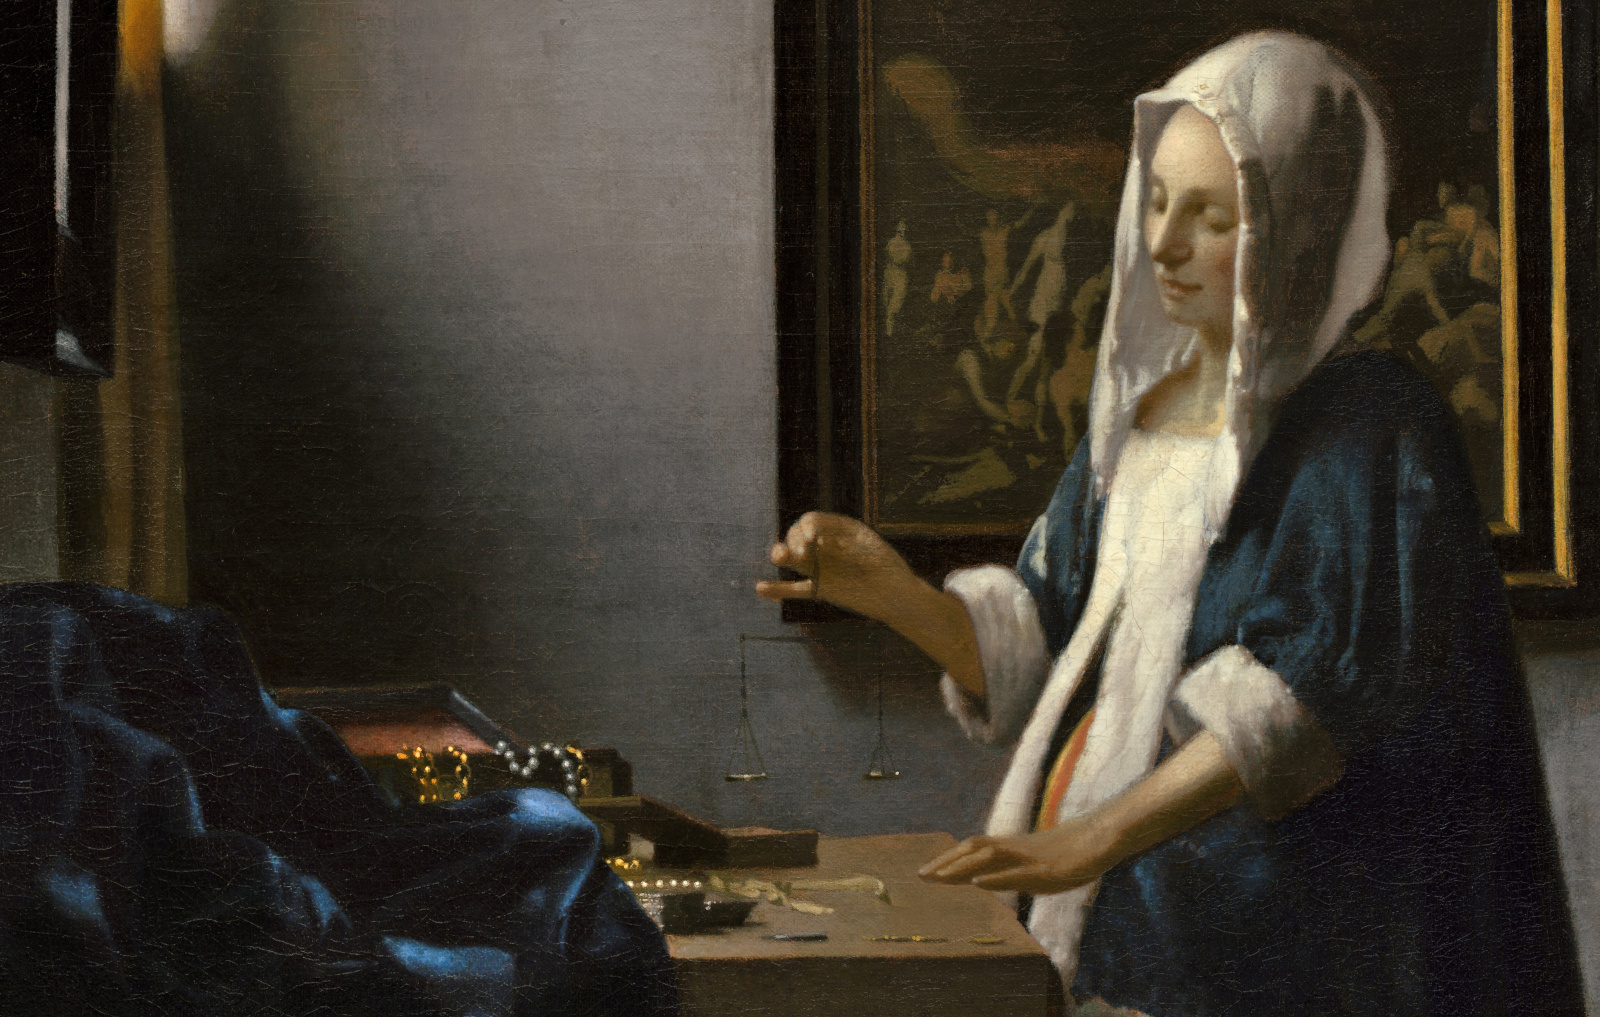 A cropped version of Johannes Vermeer's Woman with a Balance; a painting of a seemingly pregnant woman holding a small balance scale. (Scholarly opinion is that she is not supposed to be pregnant for various reasons, but to modern eyes she looks heavily pregnant).